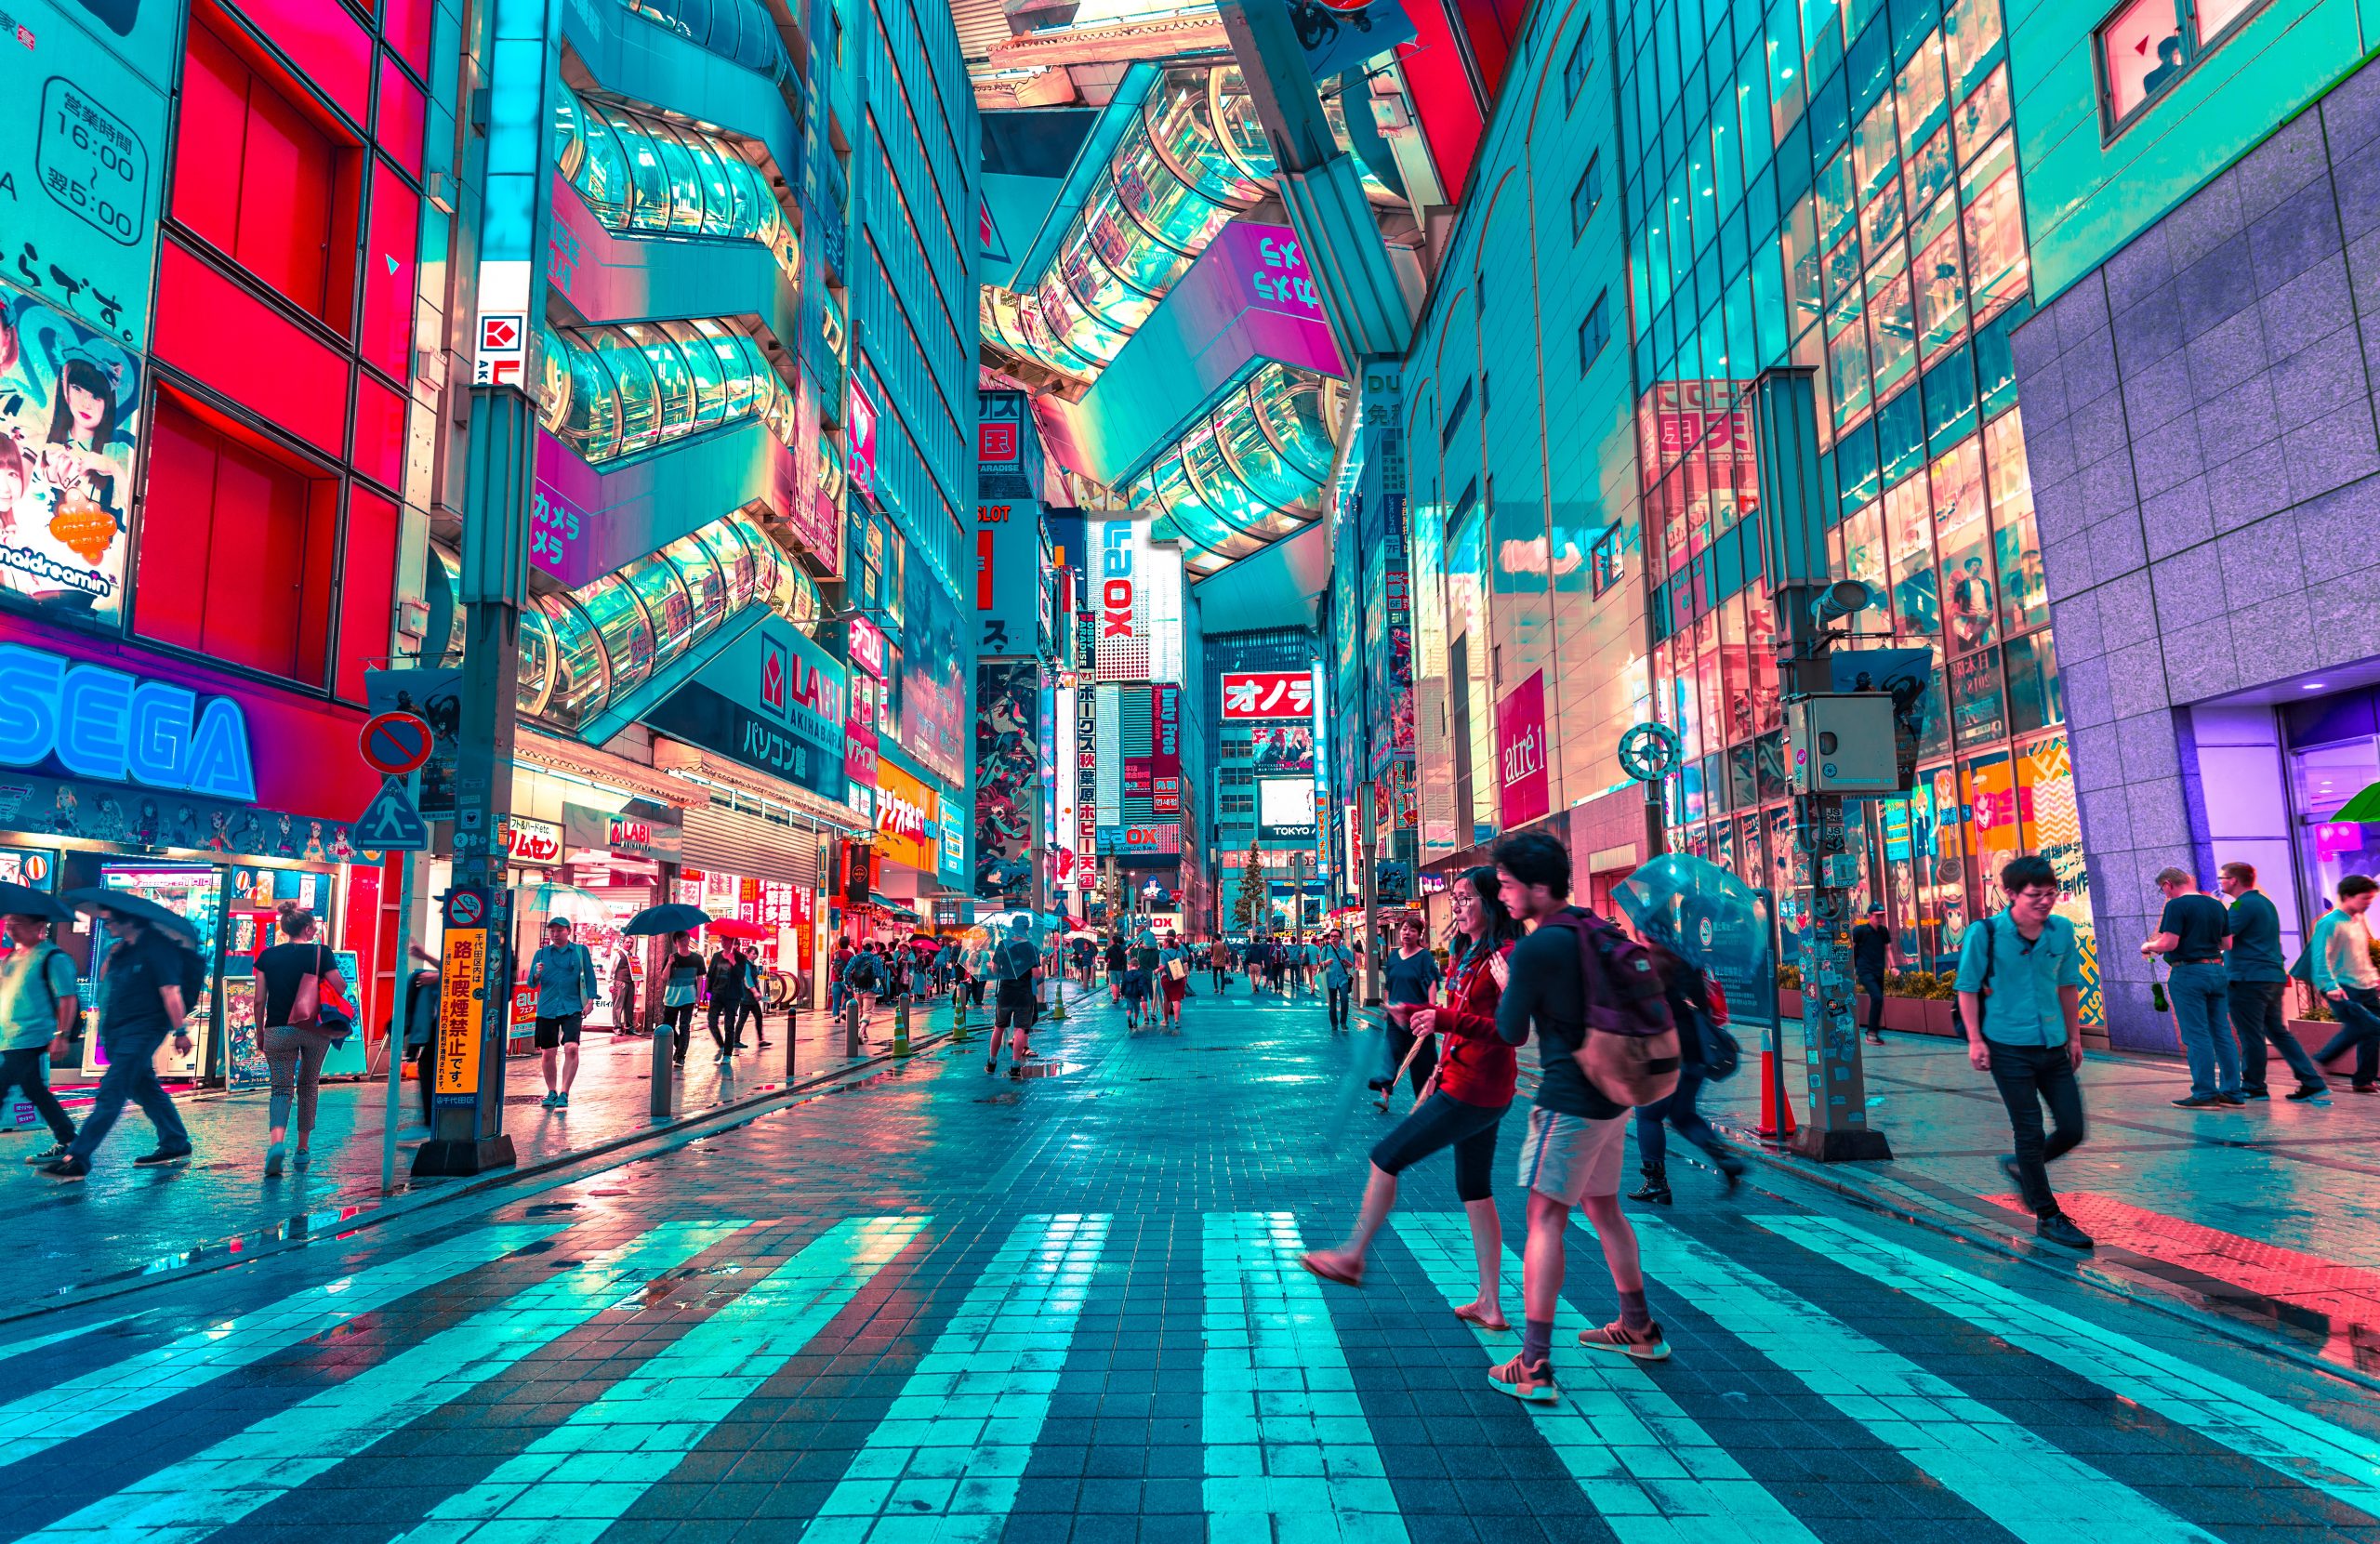  What are some tips for shopping in Tokyo?